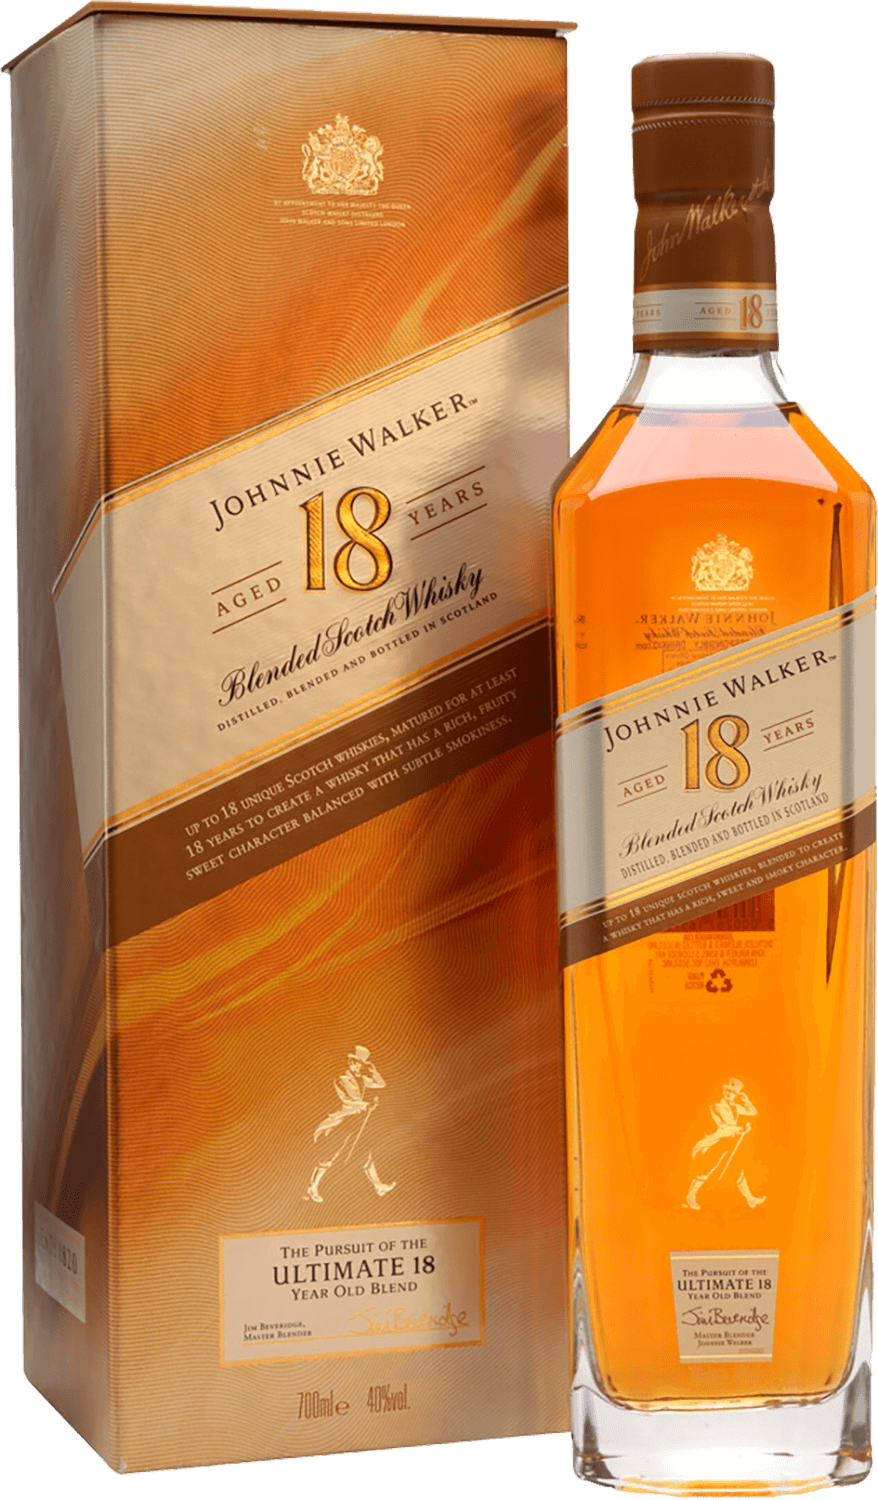 Johnnie Walker 18 y.o. Blended Scotch Whisky (gift box) johnnie walker green label blended malt scotch whisky gift box